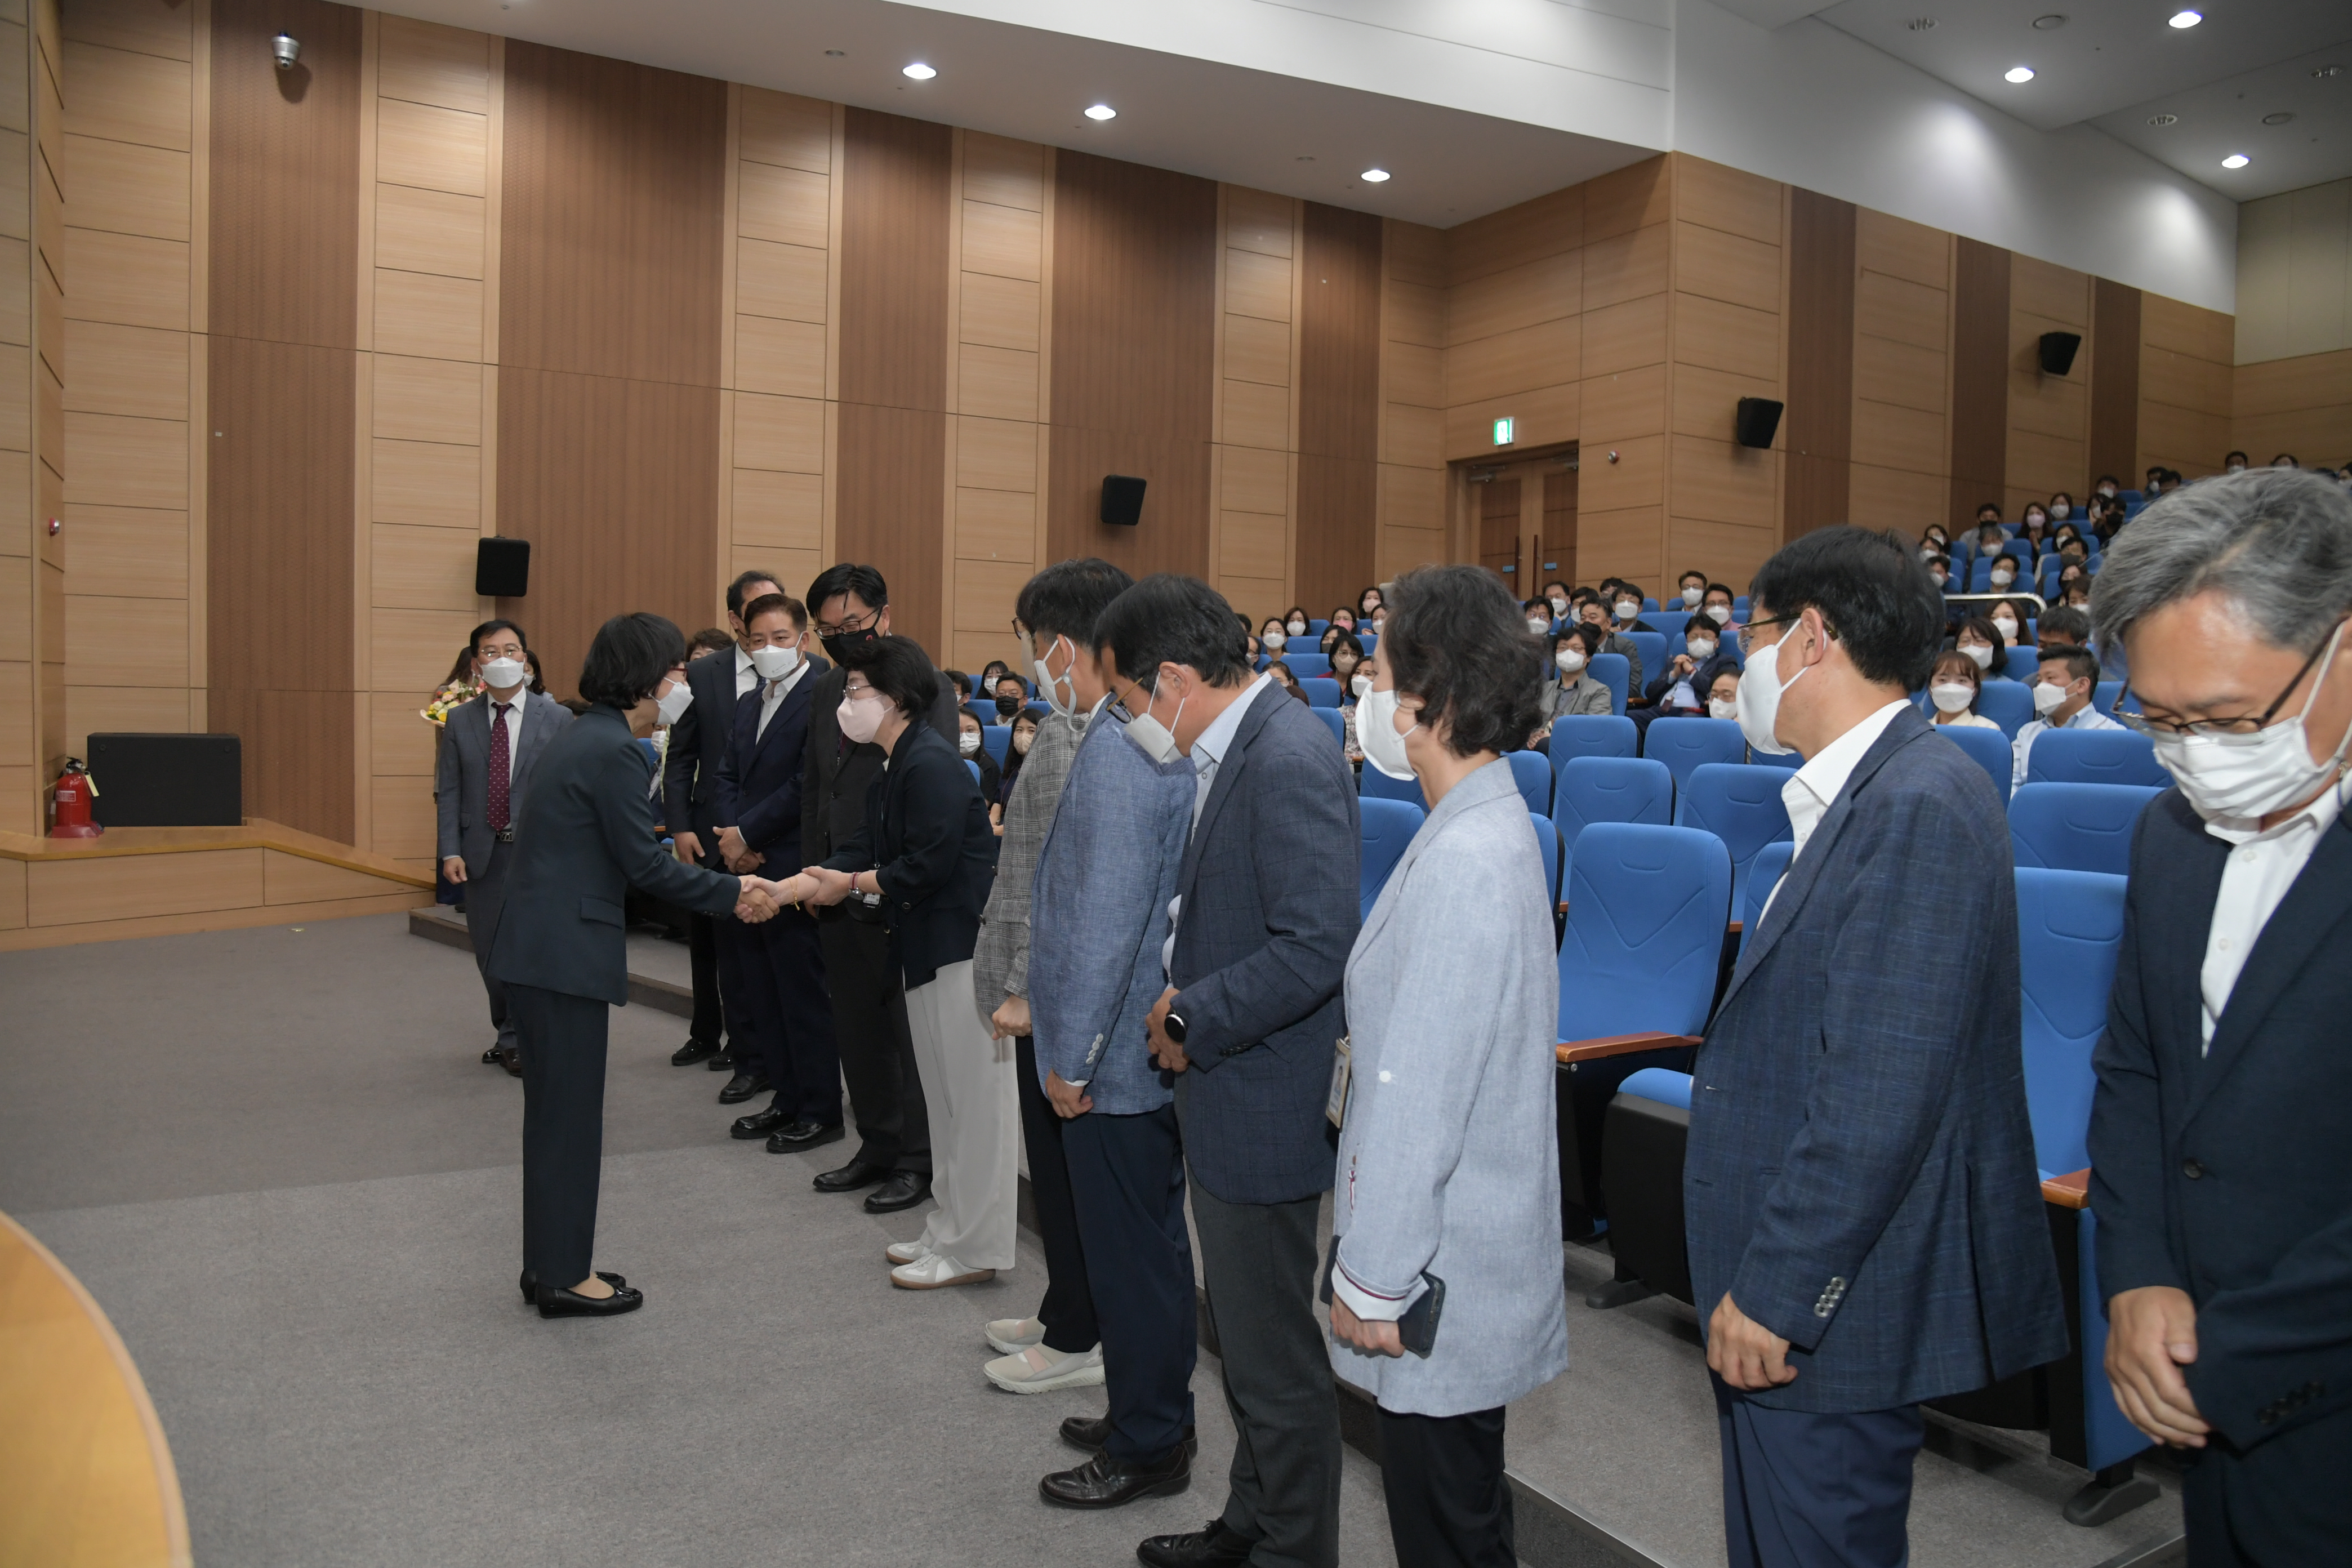 Photo News5 - [May 27, 2022] Inauguration of Minister Oh Yu-Kyoung as the 7th Minister of Food and Drug Safety